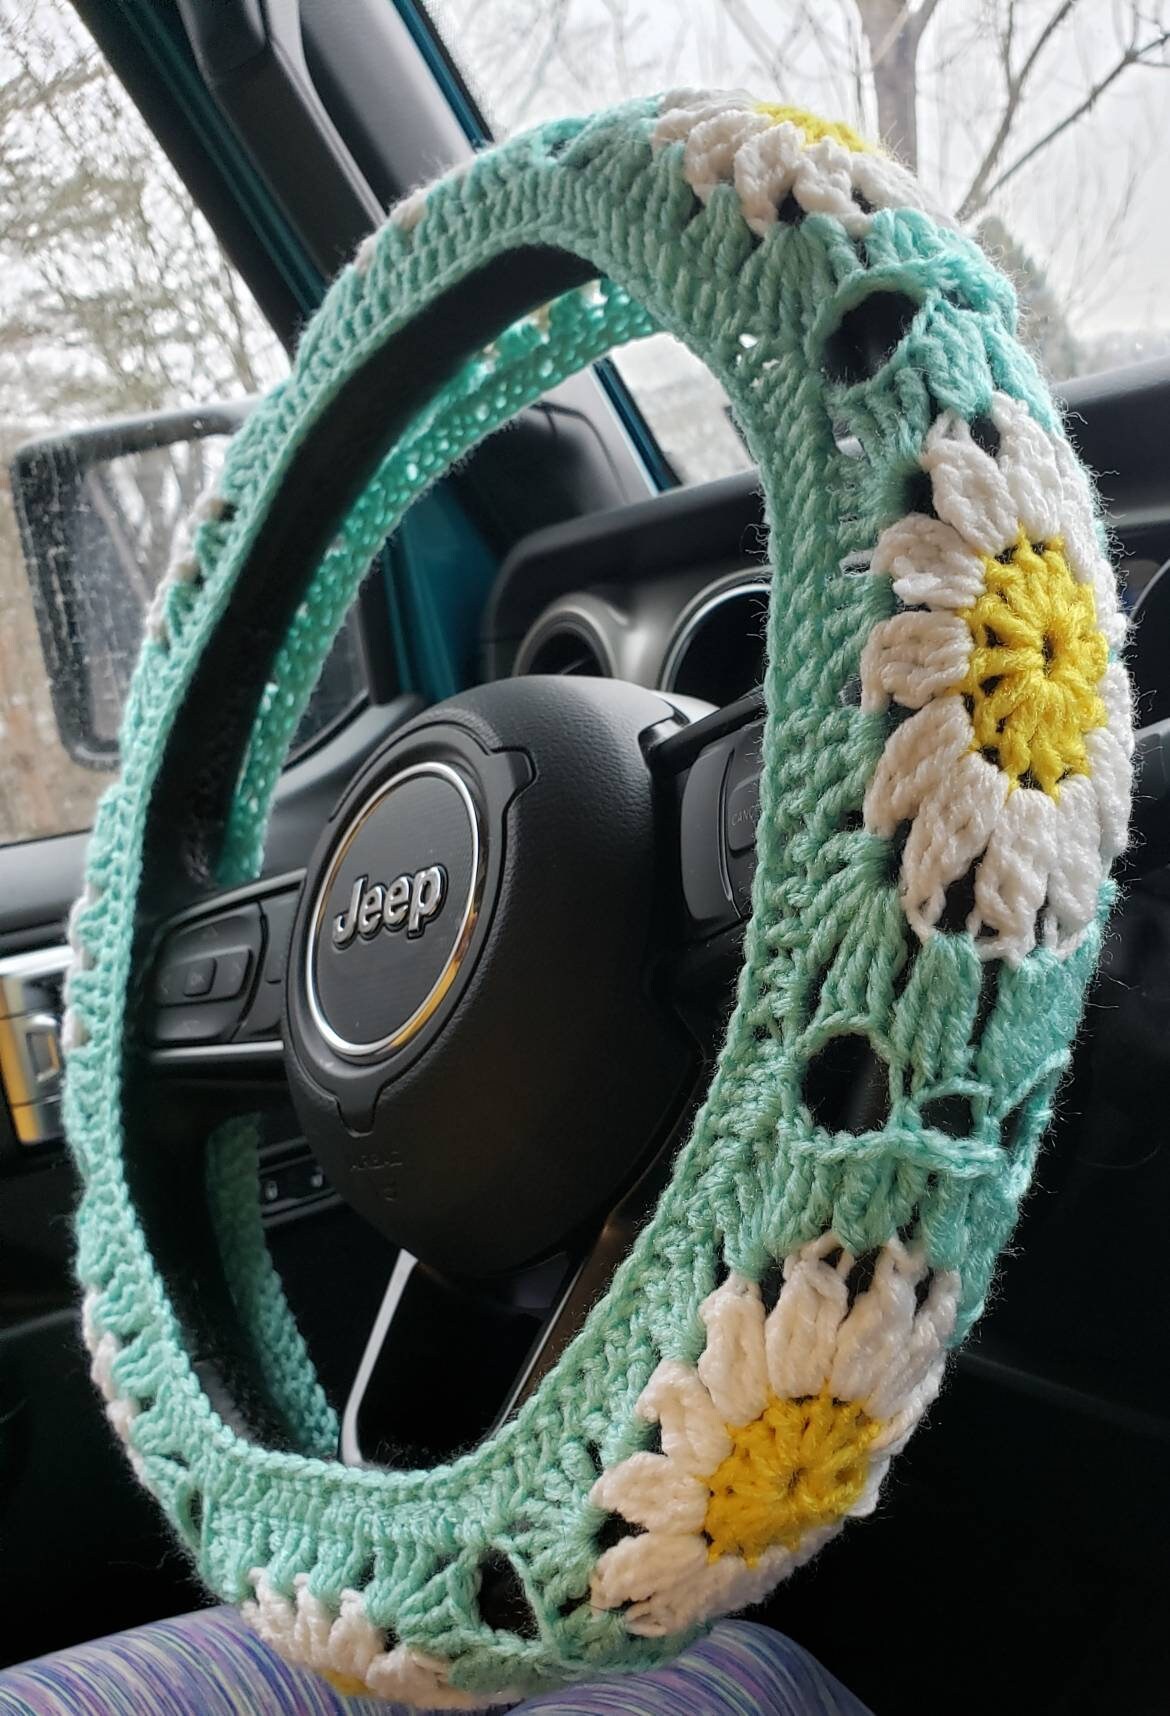 Angie's Sandworm Steering Wheel Cover … This Is Creative Crochet At Its  Best!